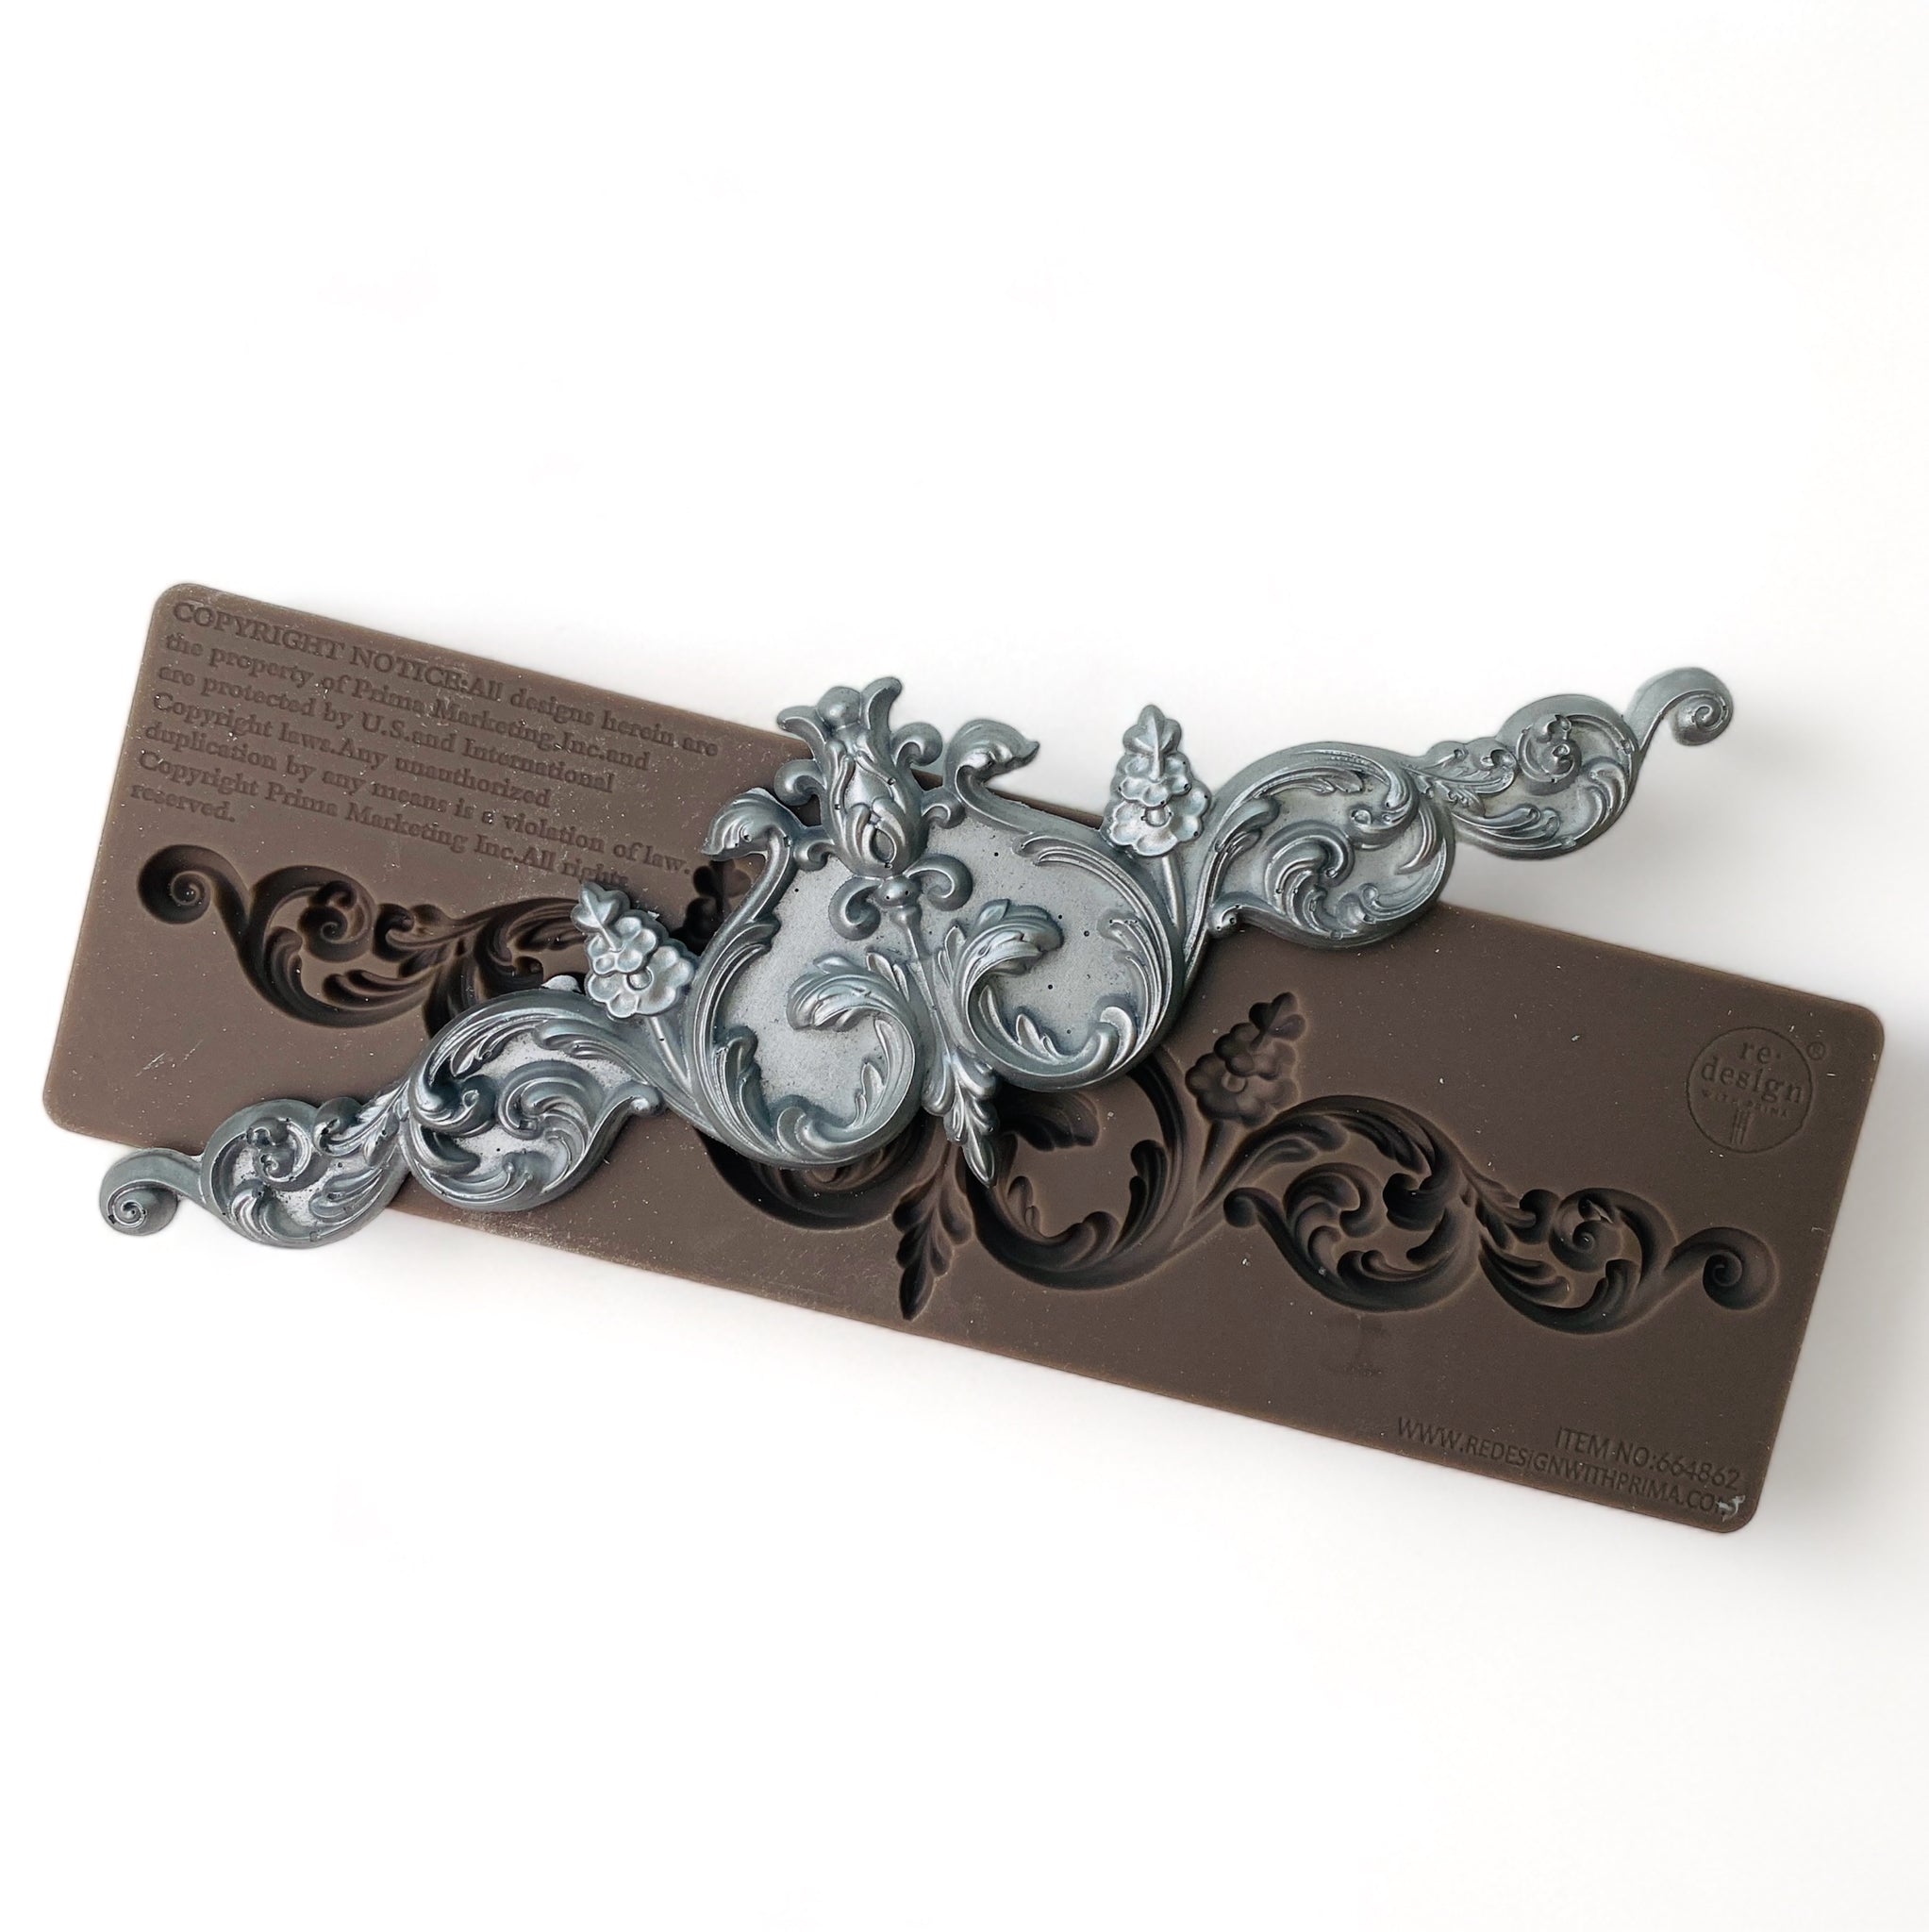 A brown silicone mold and silver colored casting of an ornate scroll design are against a white background.